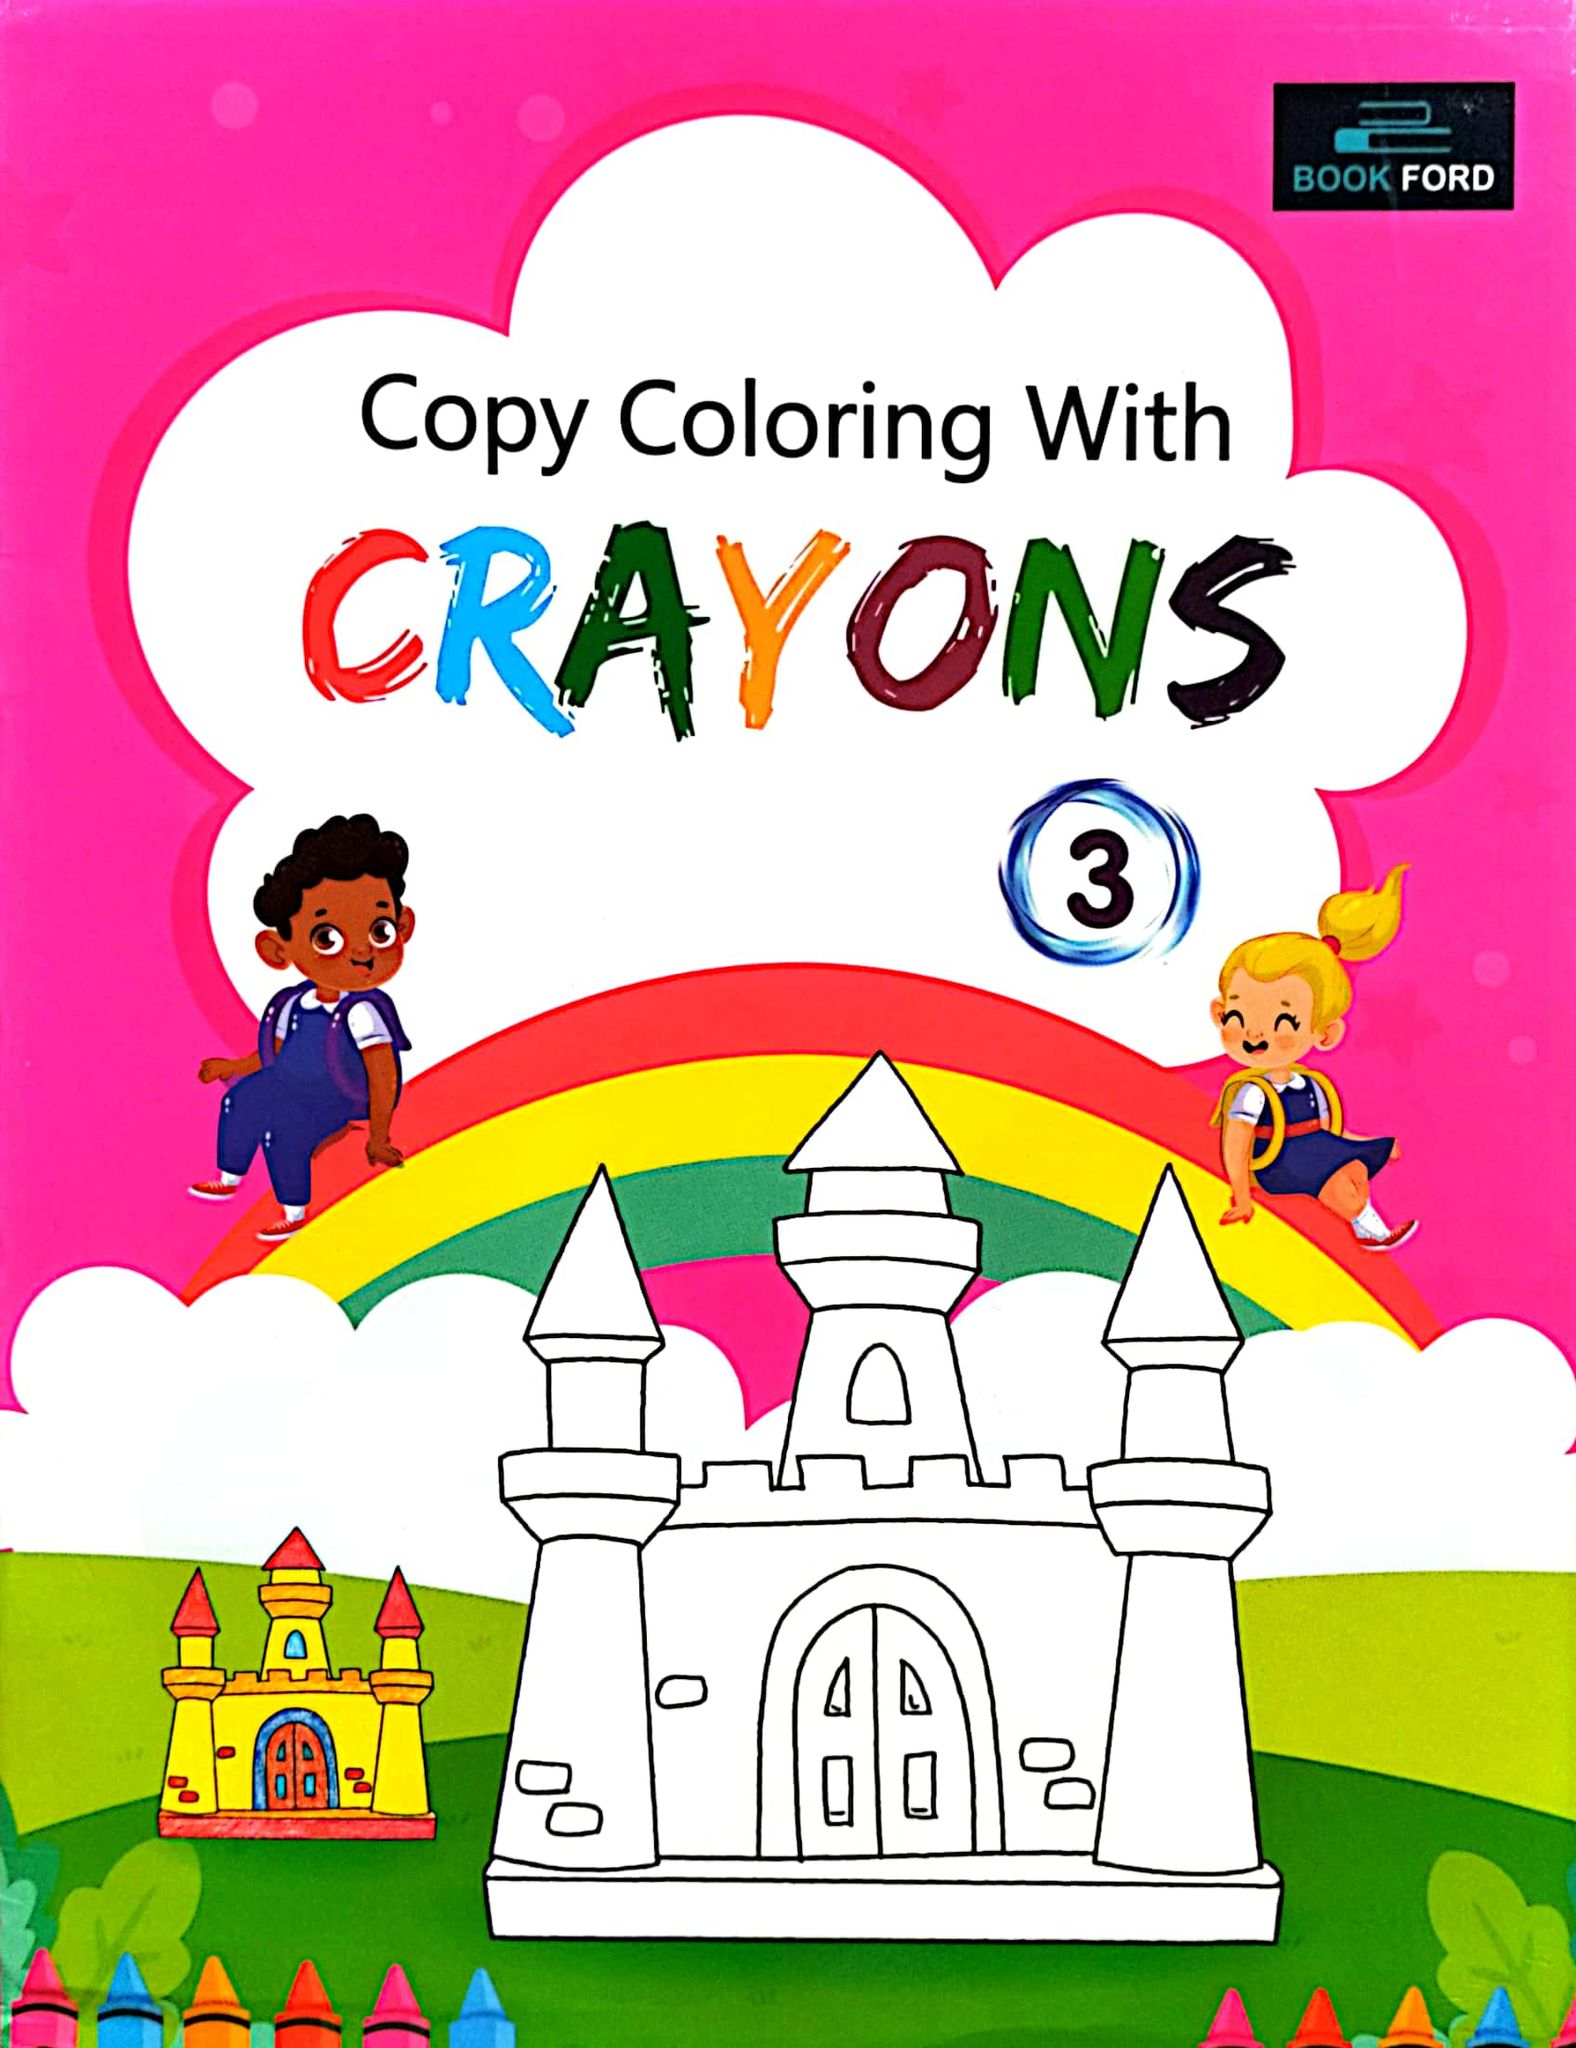 Copy Coloring With Crayons 3 (পেপারব্যাক)